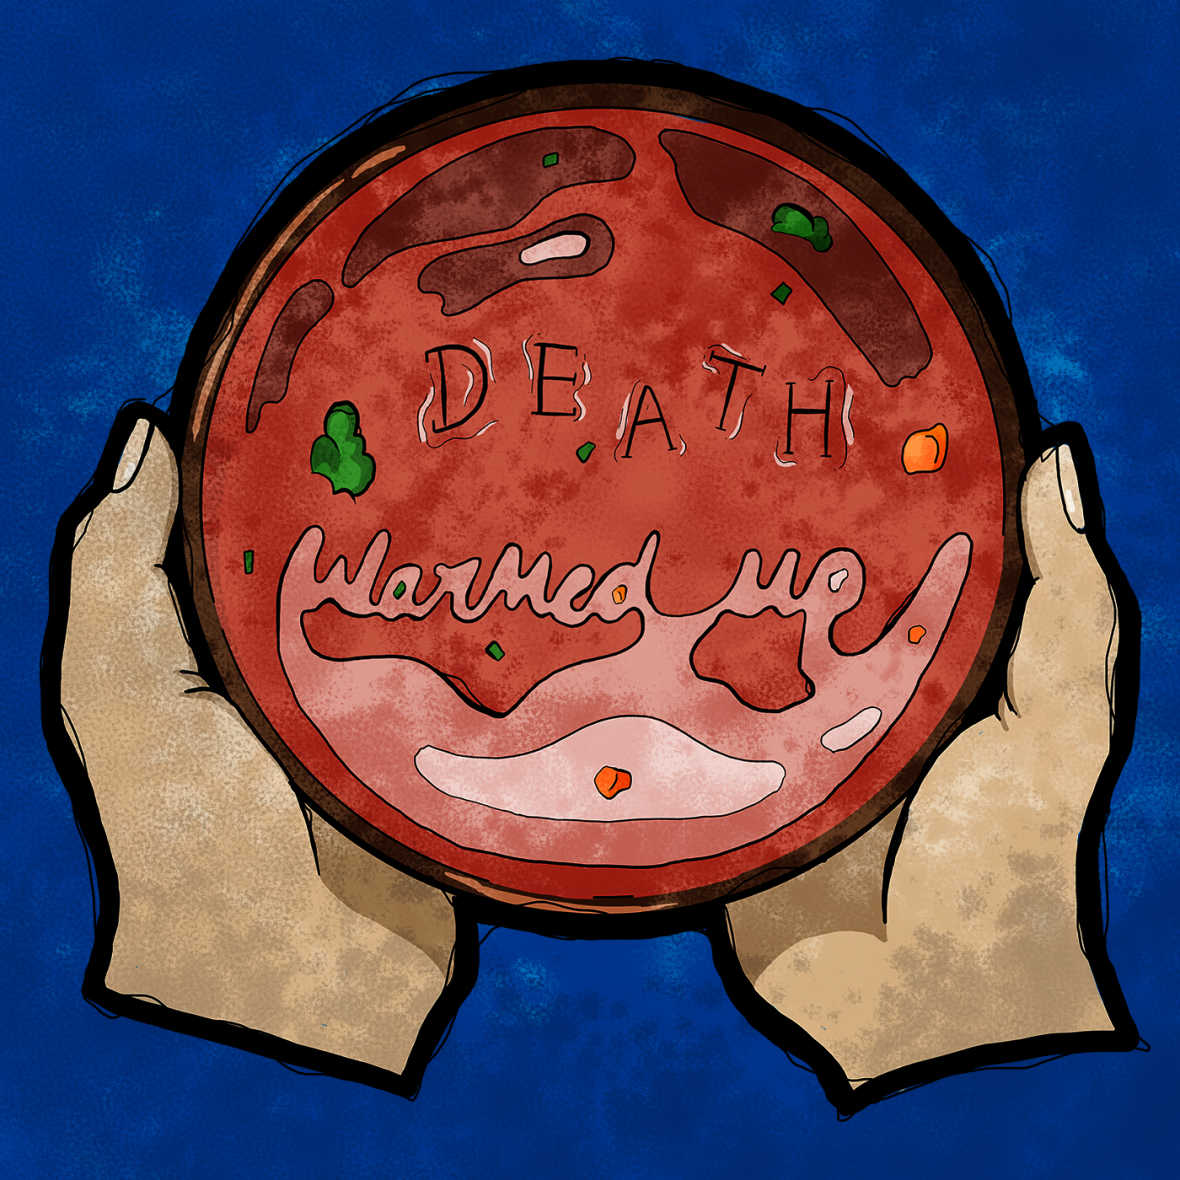 Death Warmed Up